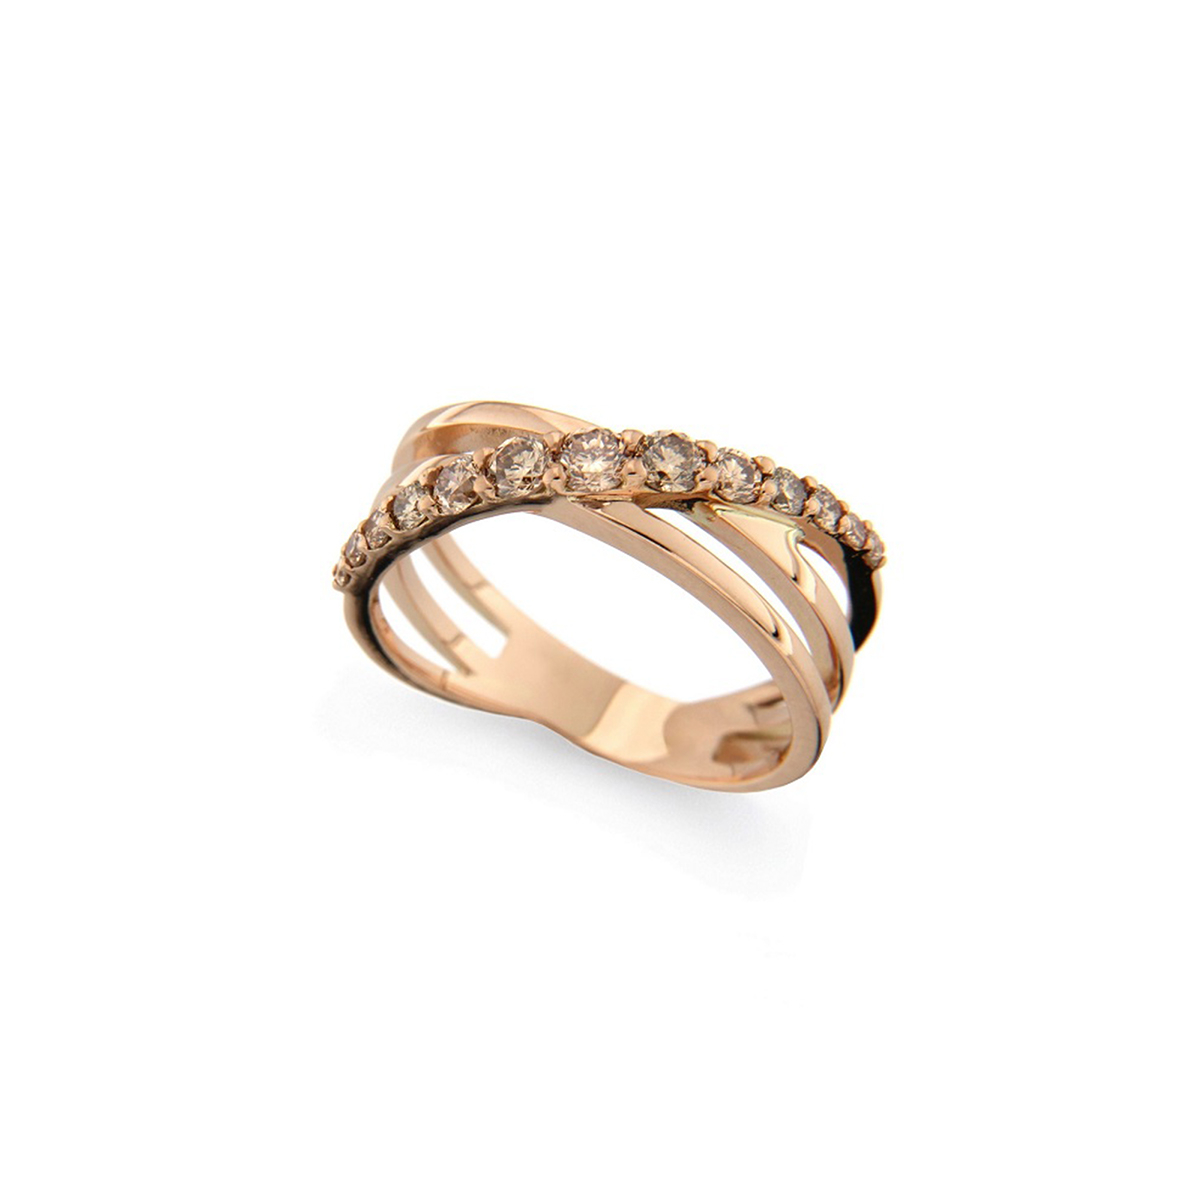 18 K Rose Gold Criss-Cross Ring with Brown Diamonds